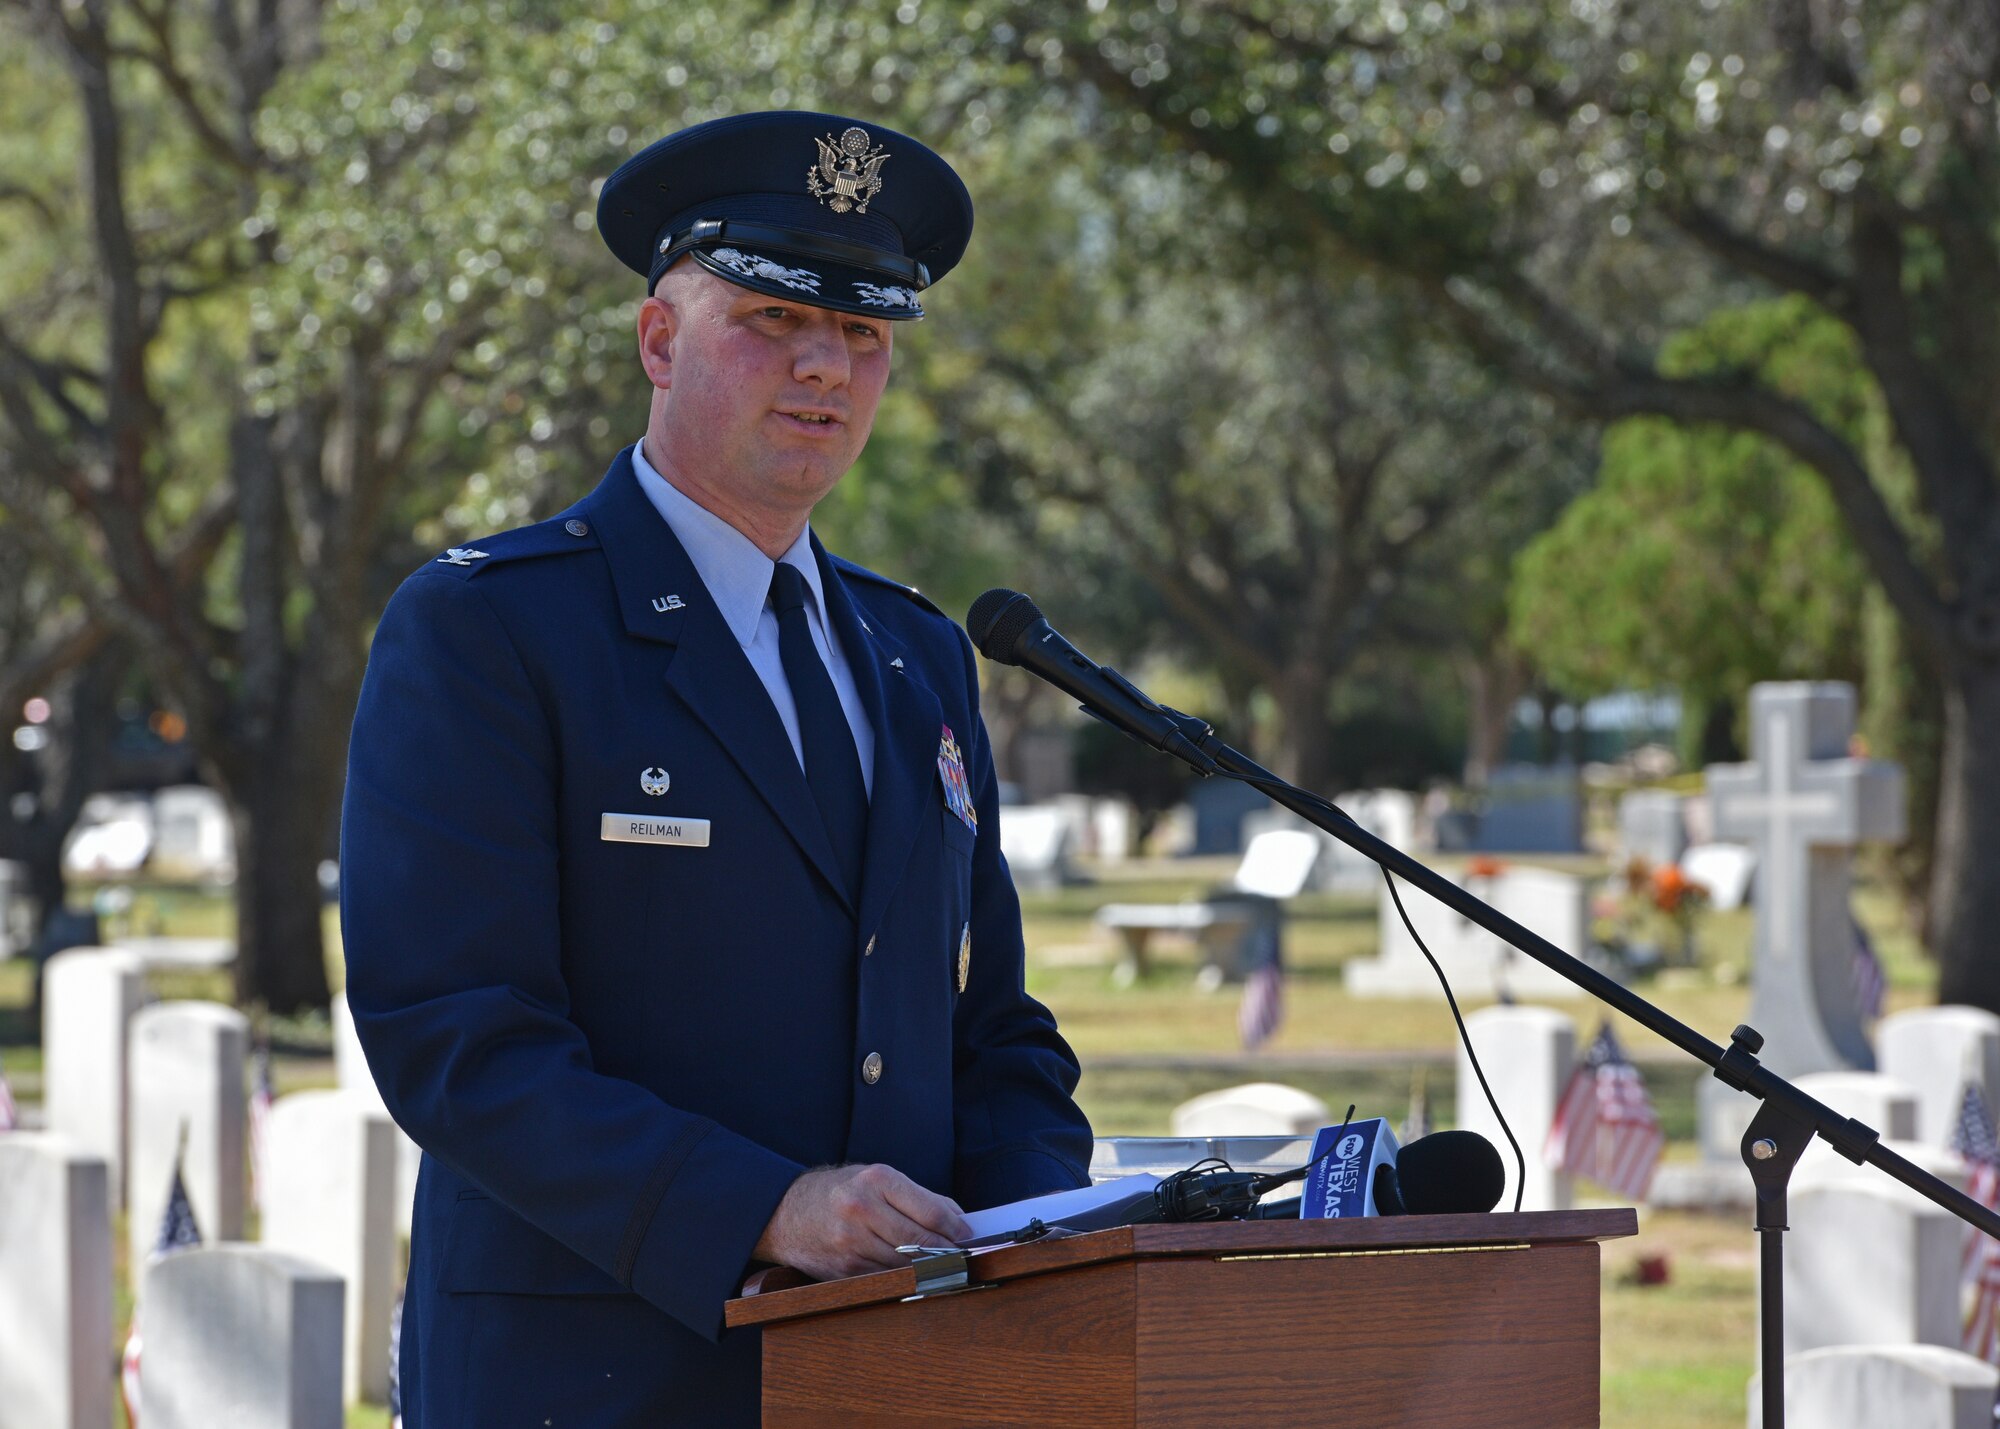 U.S. Air Force Col. Matthew Reilman, 17th Training Wing commander, speaks at the Veterans Day ceremony at the Fairmount Cemetery in San Angelo, Texas, Nov. 11. Reilman spoke about the importance of thanking and supporting our veterans daily. (U.S. Air Force photo by Senior Airman Ashley Thrash)